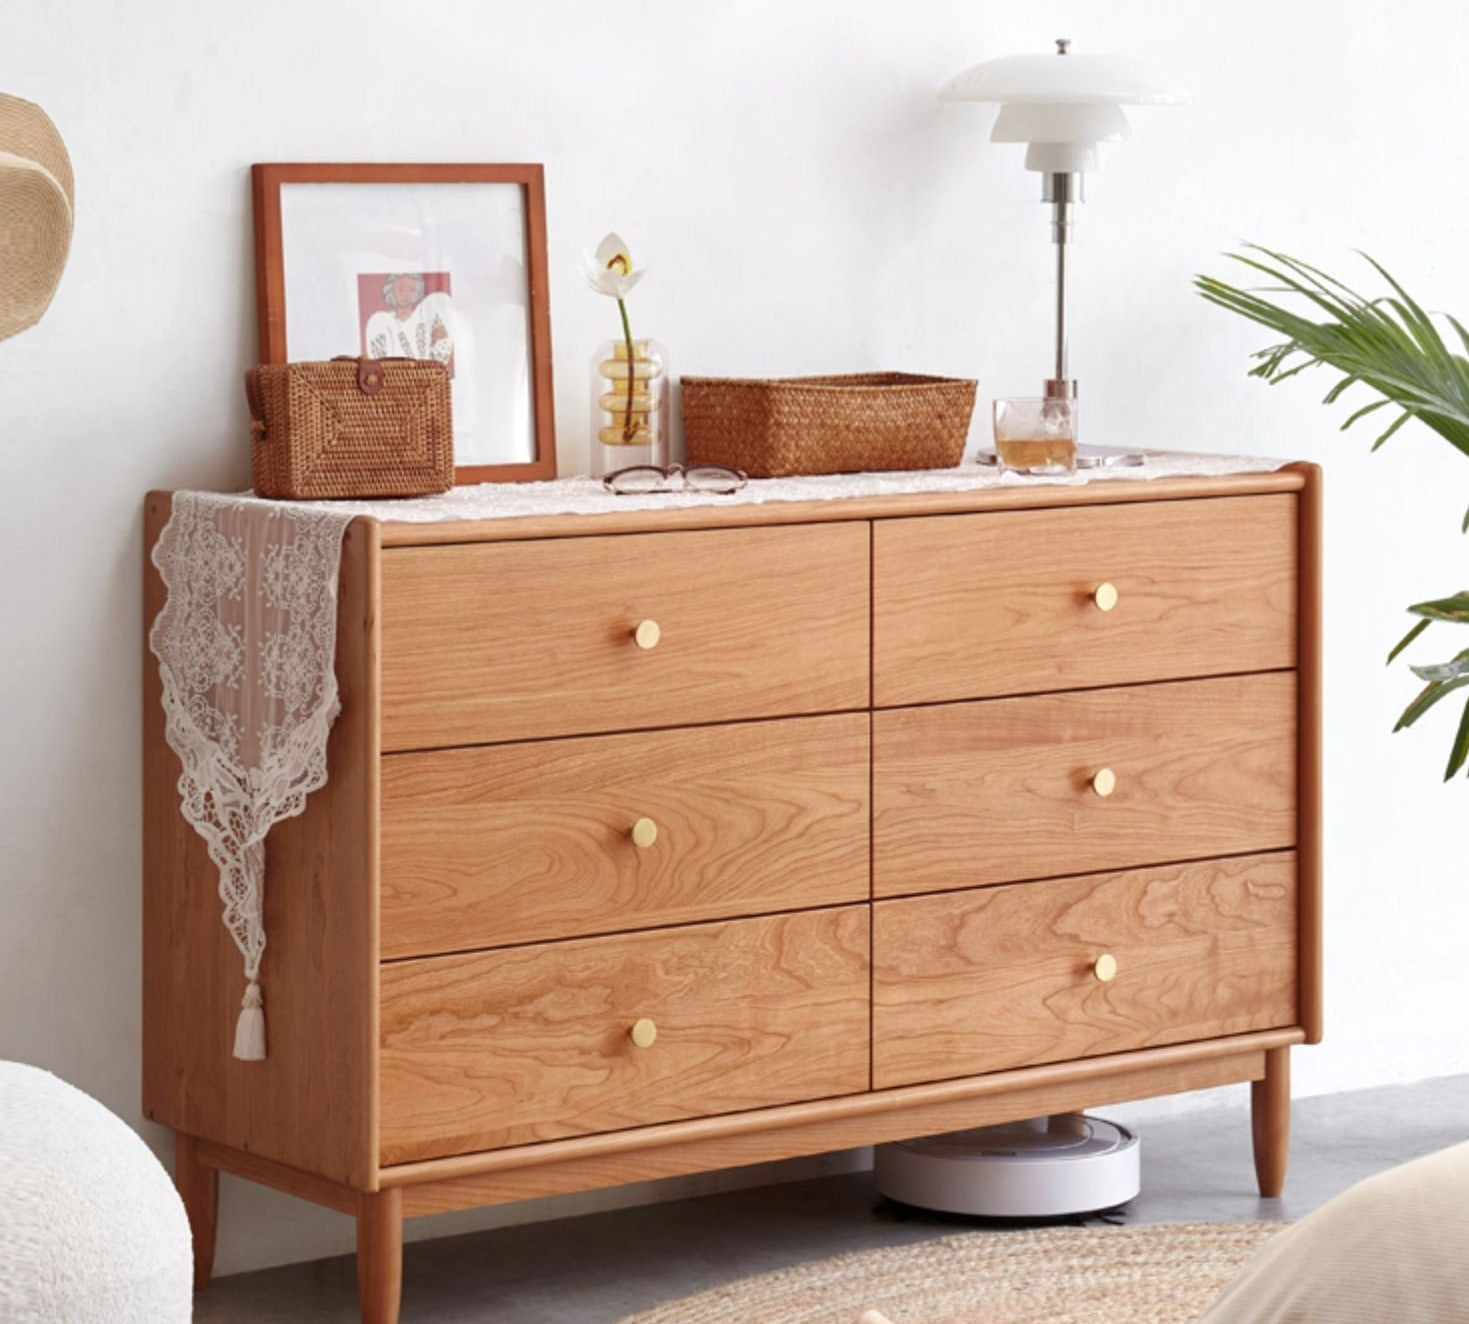 Cherry solid wood chest of drawers"